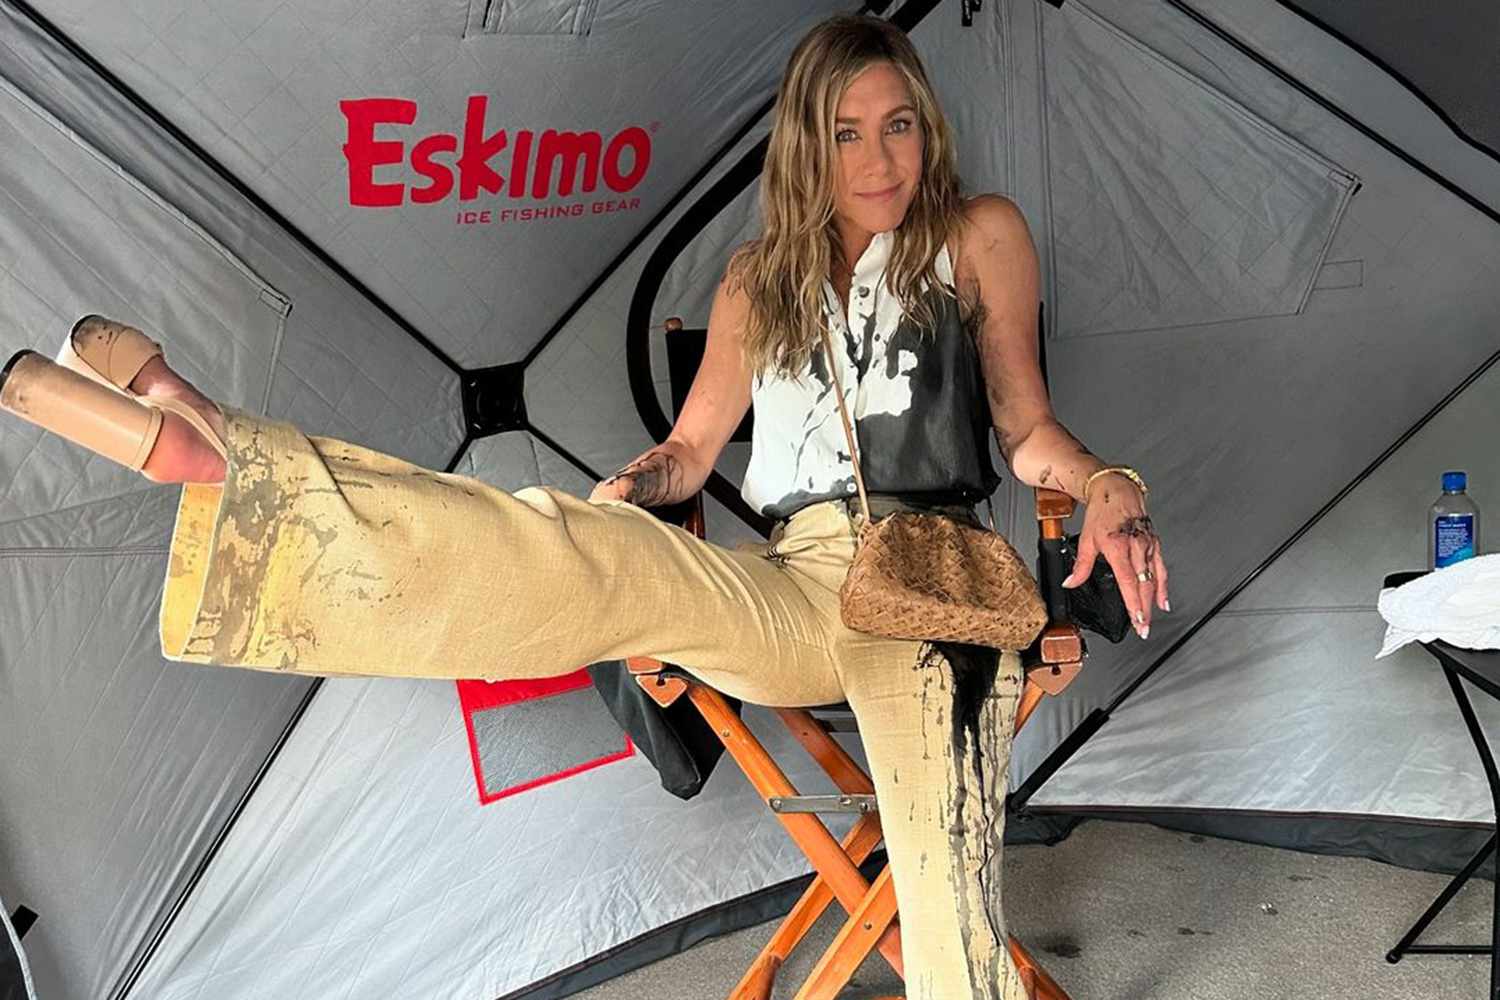 Jennifer Aniston Smiles After Being Covered in Oil in Behind-the-Scenes Photo from 'The Morning Show' Set